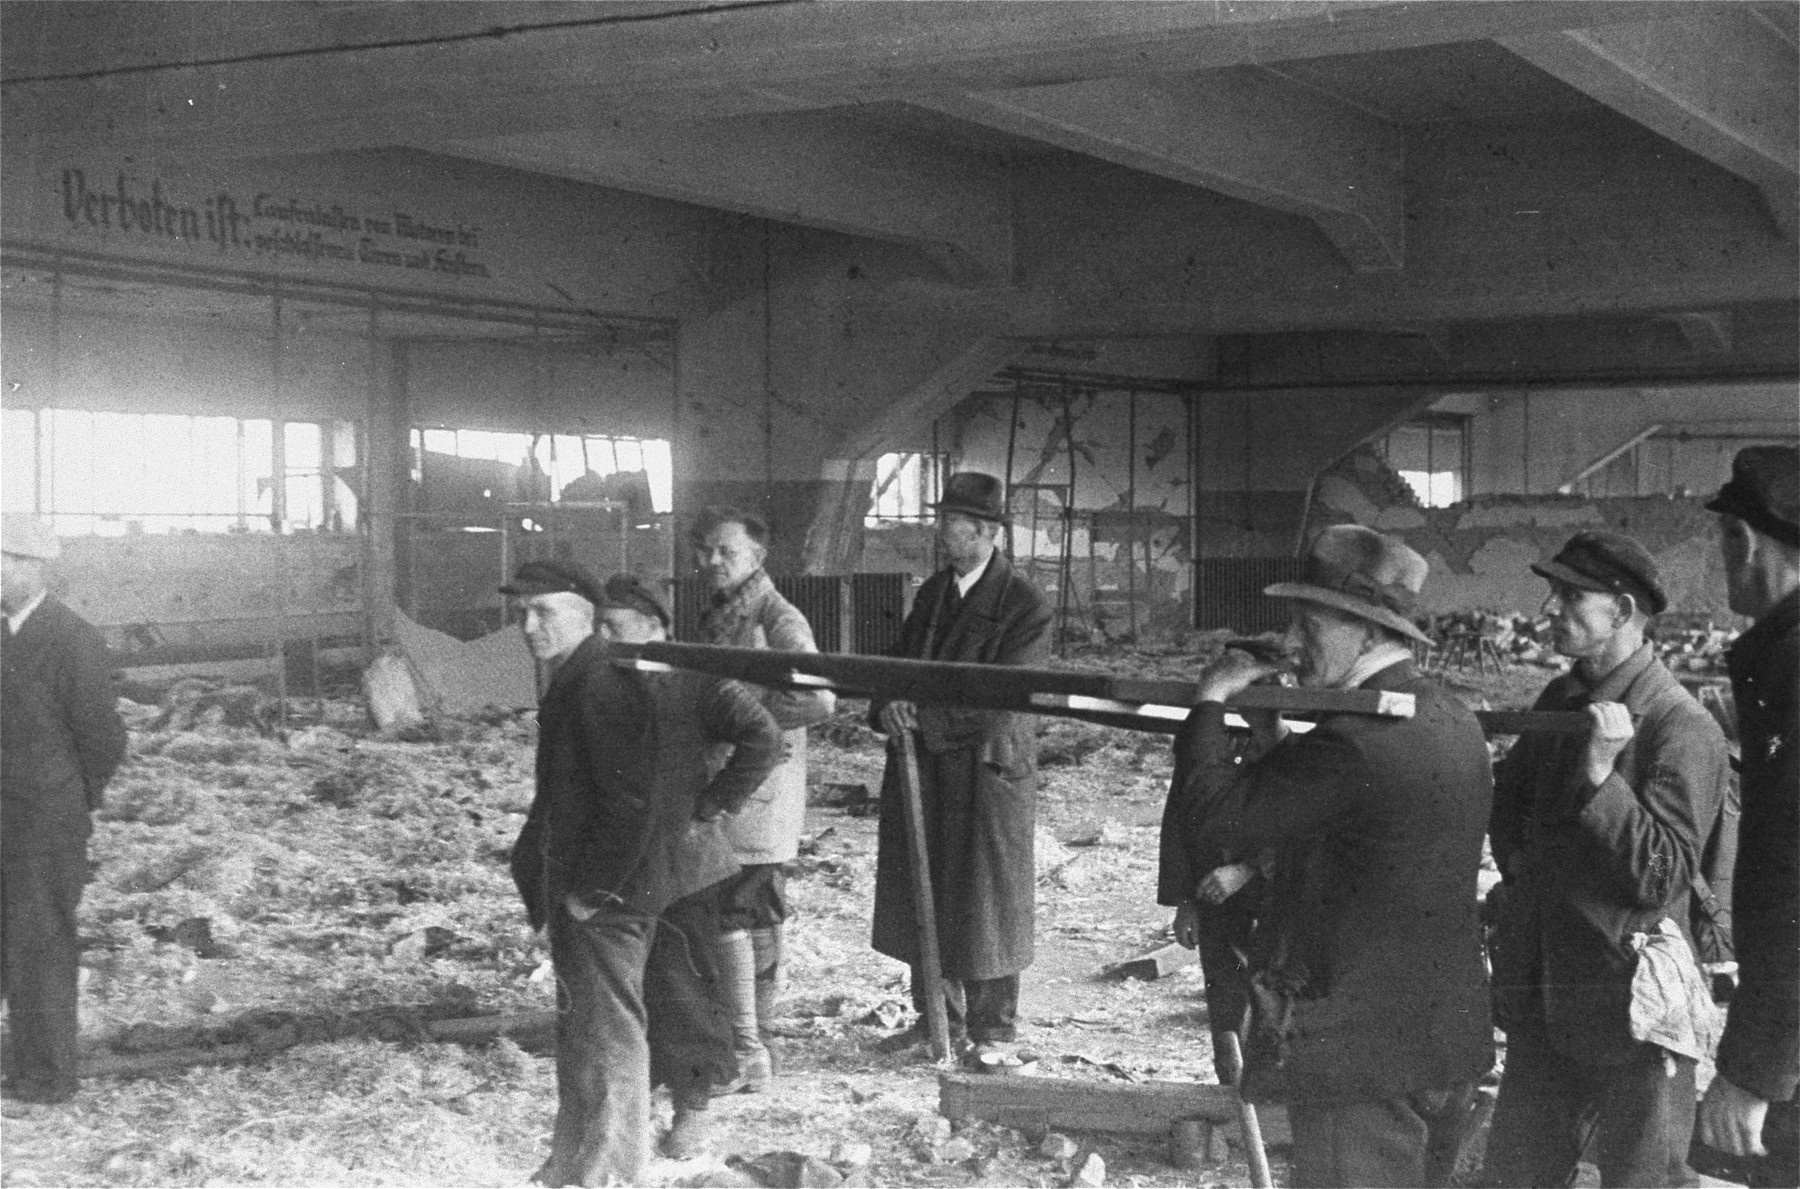 German civilians from the town of Nordhausen remove corpses from the central barracks (Boelke Kaserne) in the Nordhausen concentration camp.